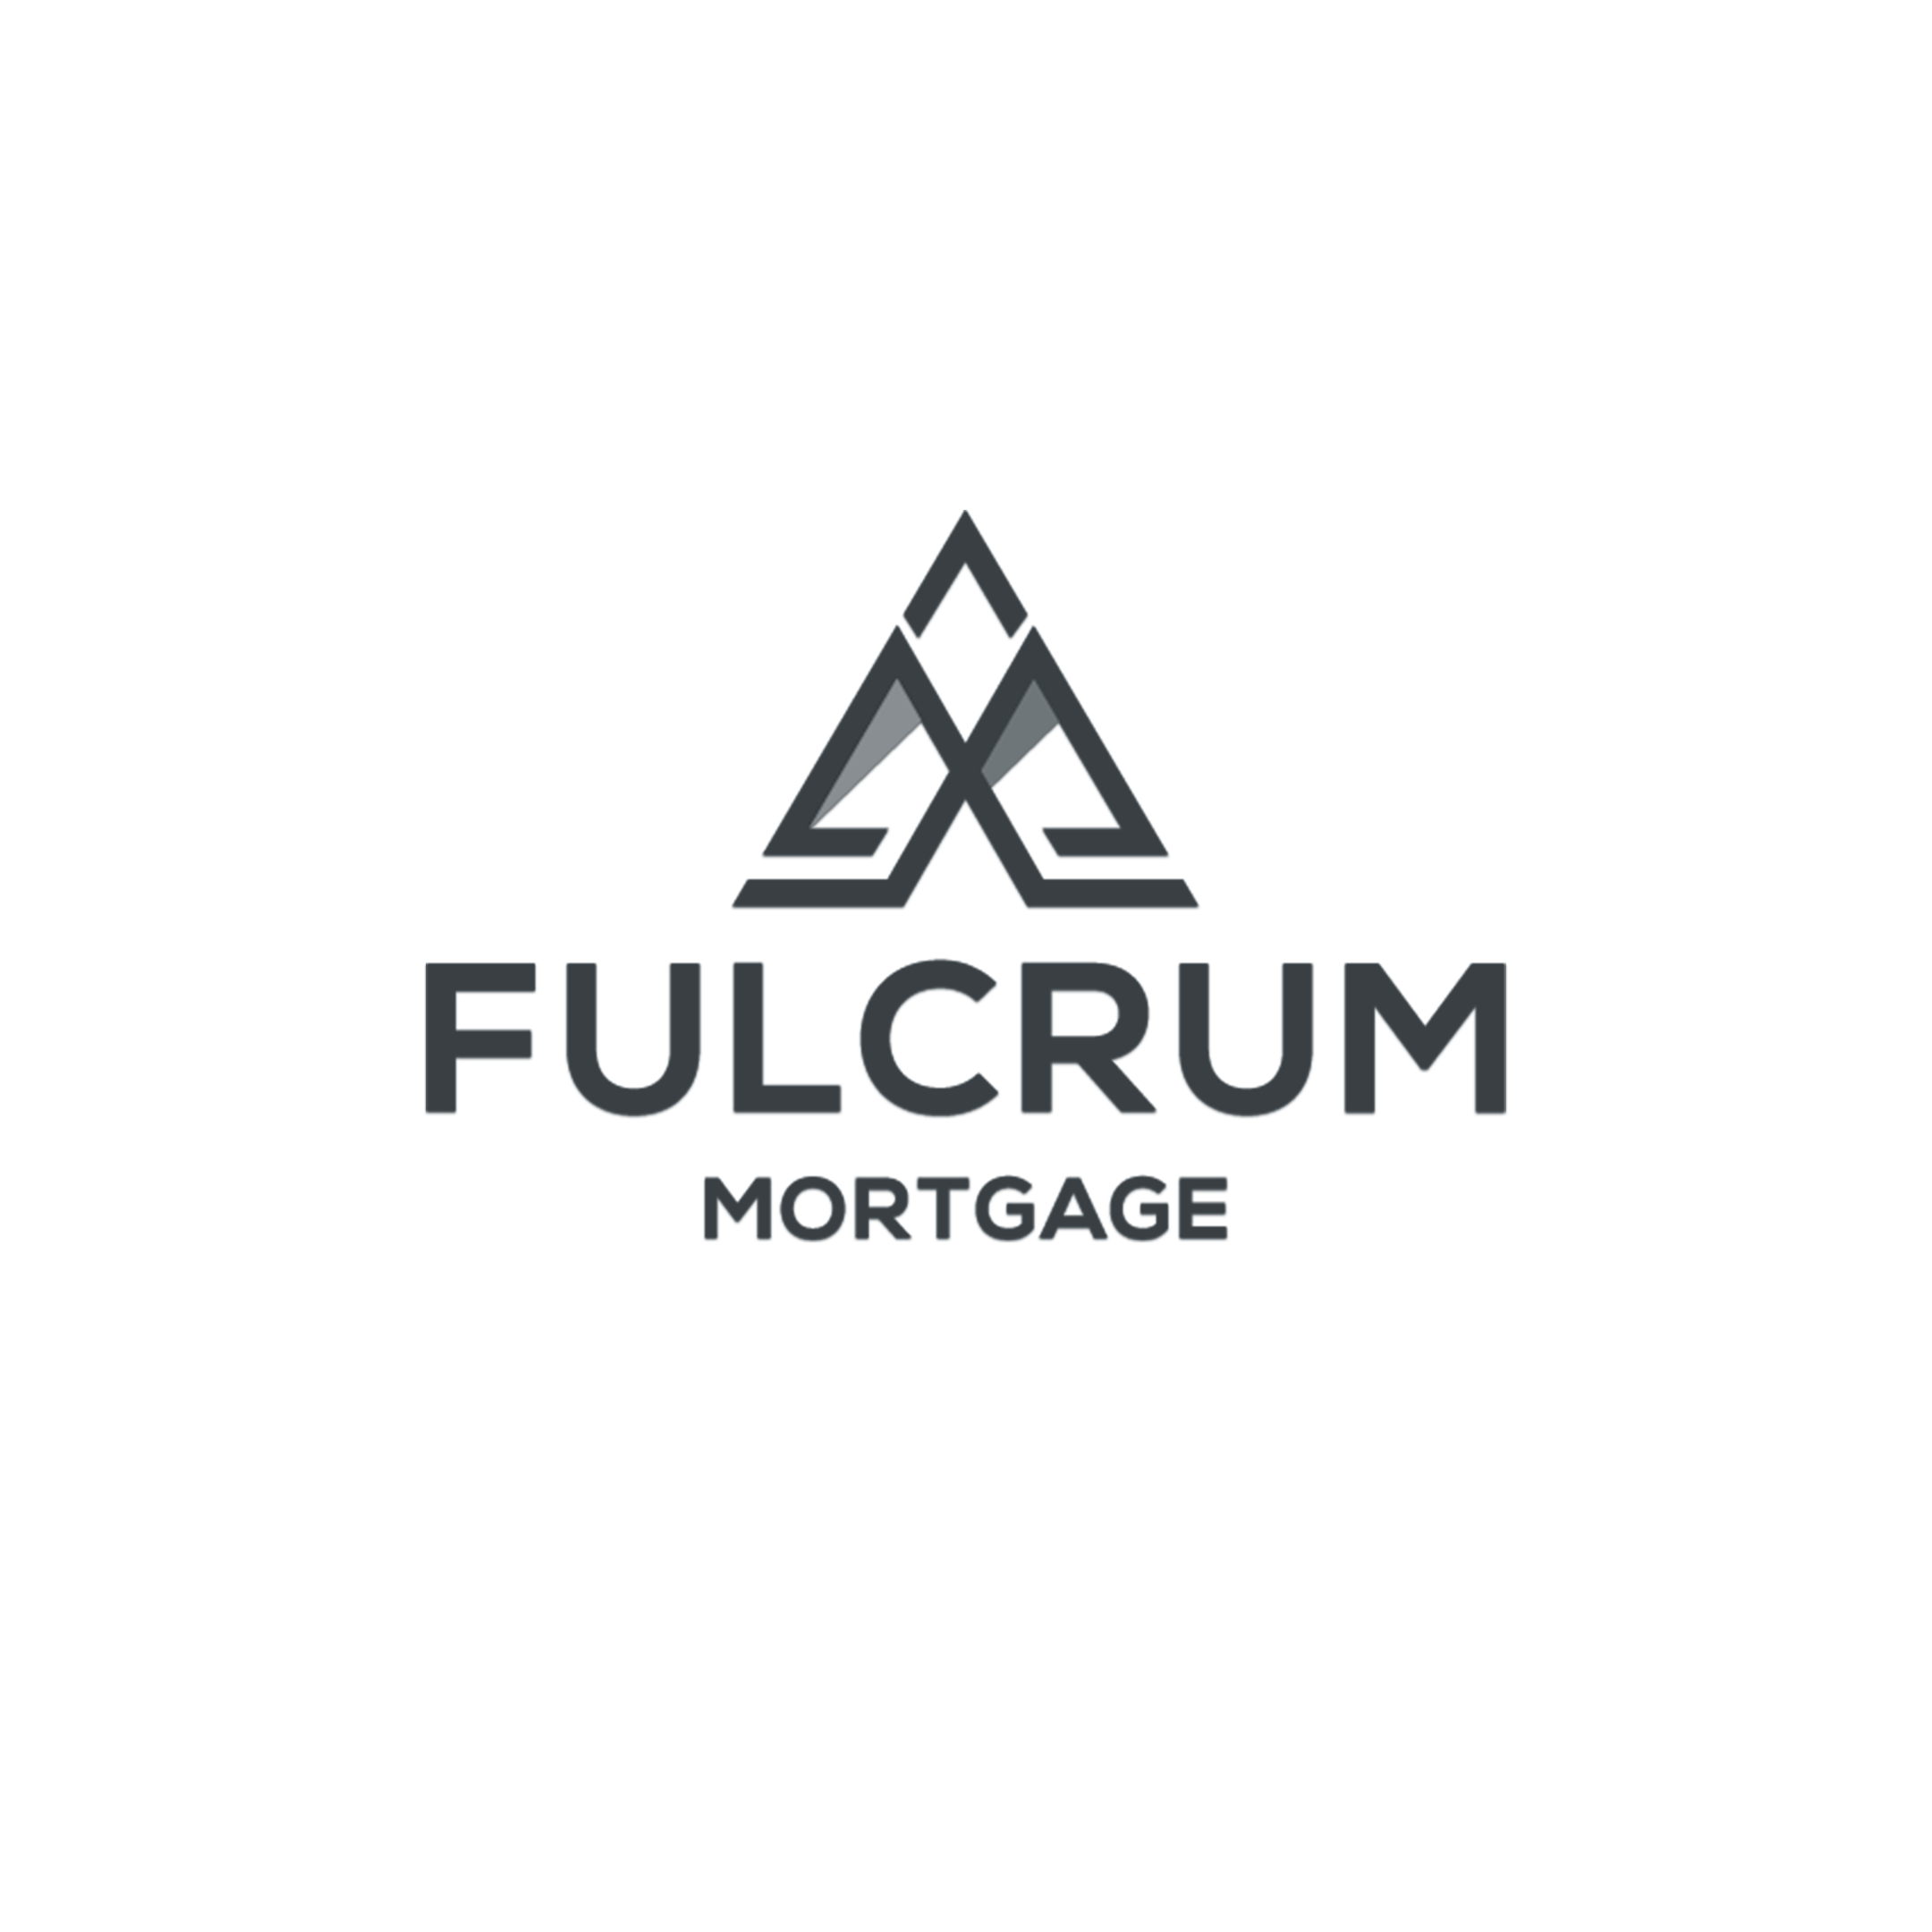 Fulcrum-Mortgage - Colorized.png